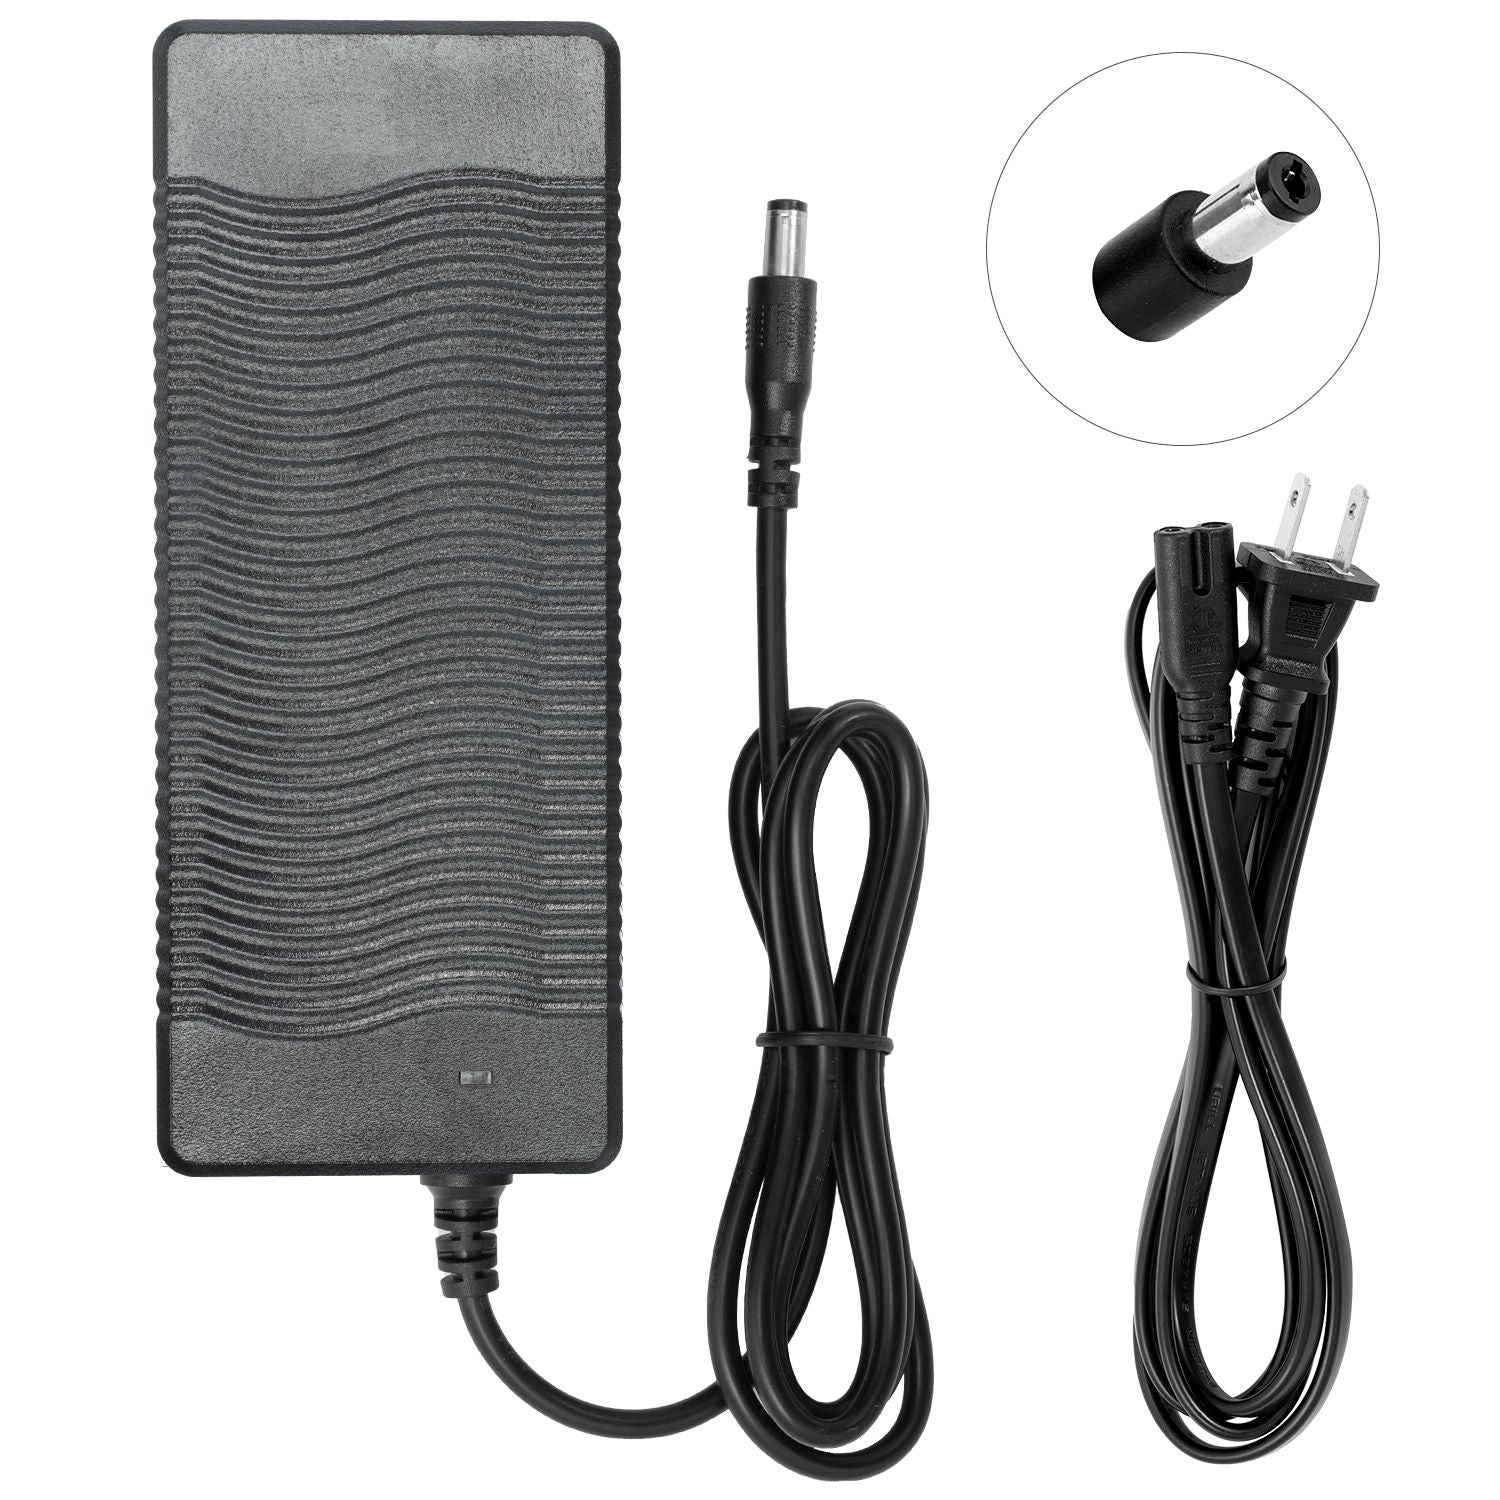 UL Listed Charger for Ride1UP E-Bike (NOT for Prodigy, Please Select the Correct Battery Voltage Before Ordering)